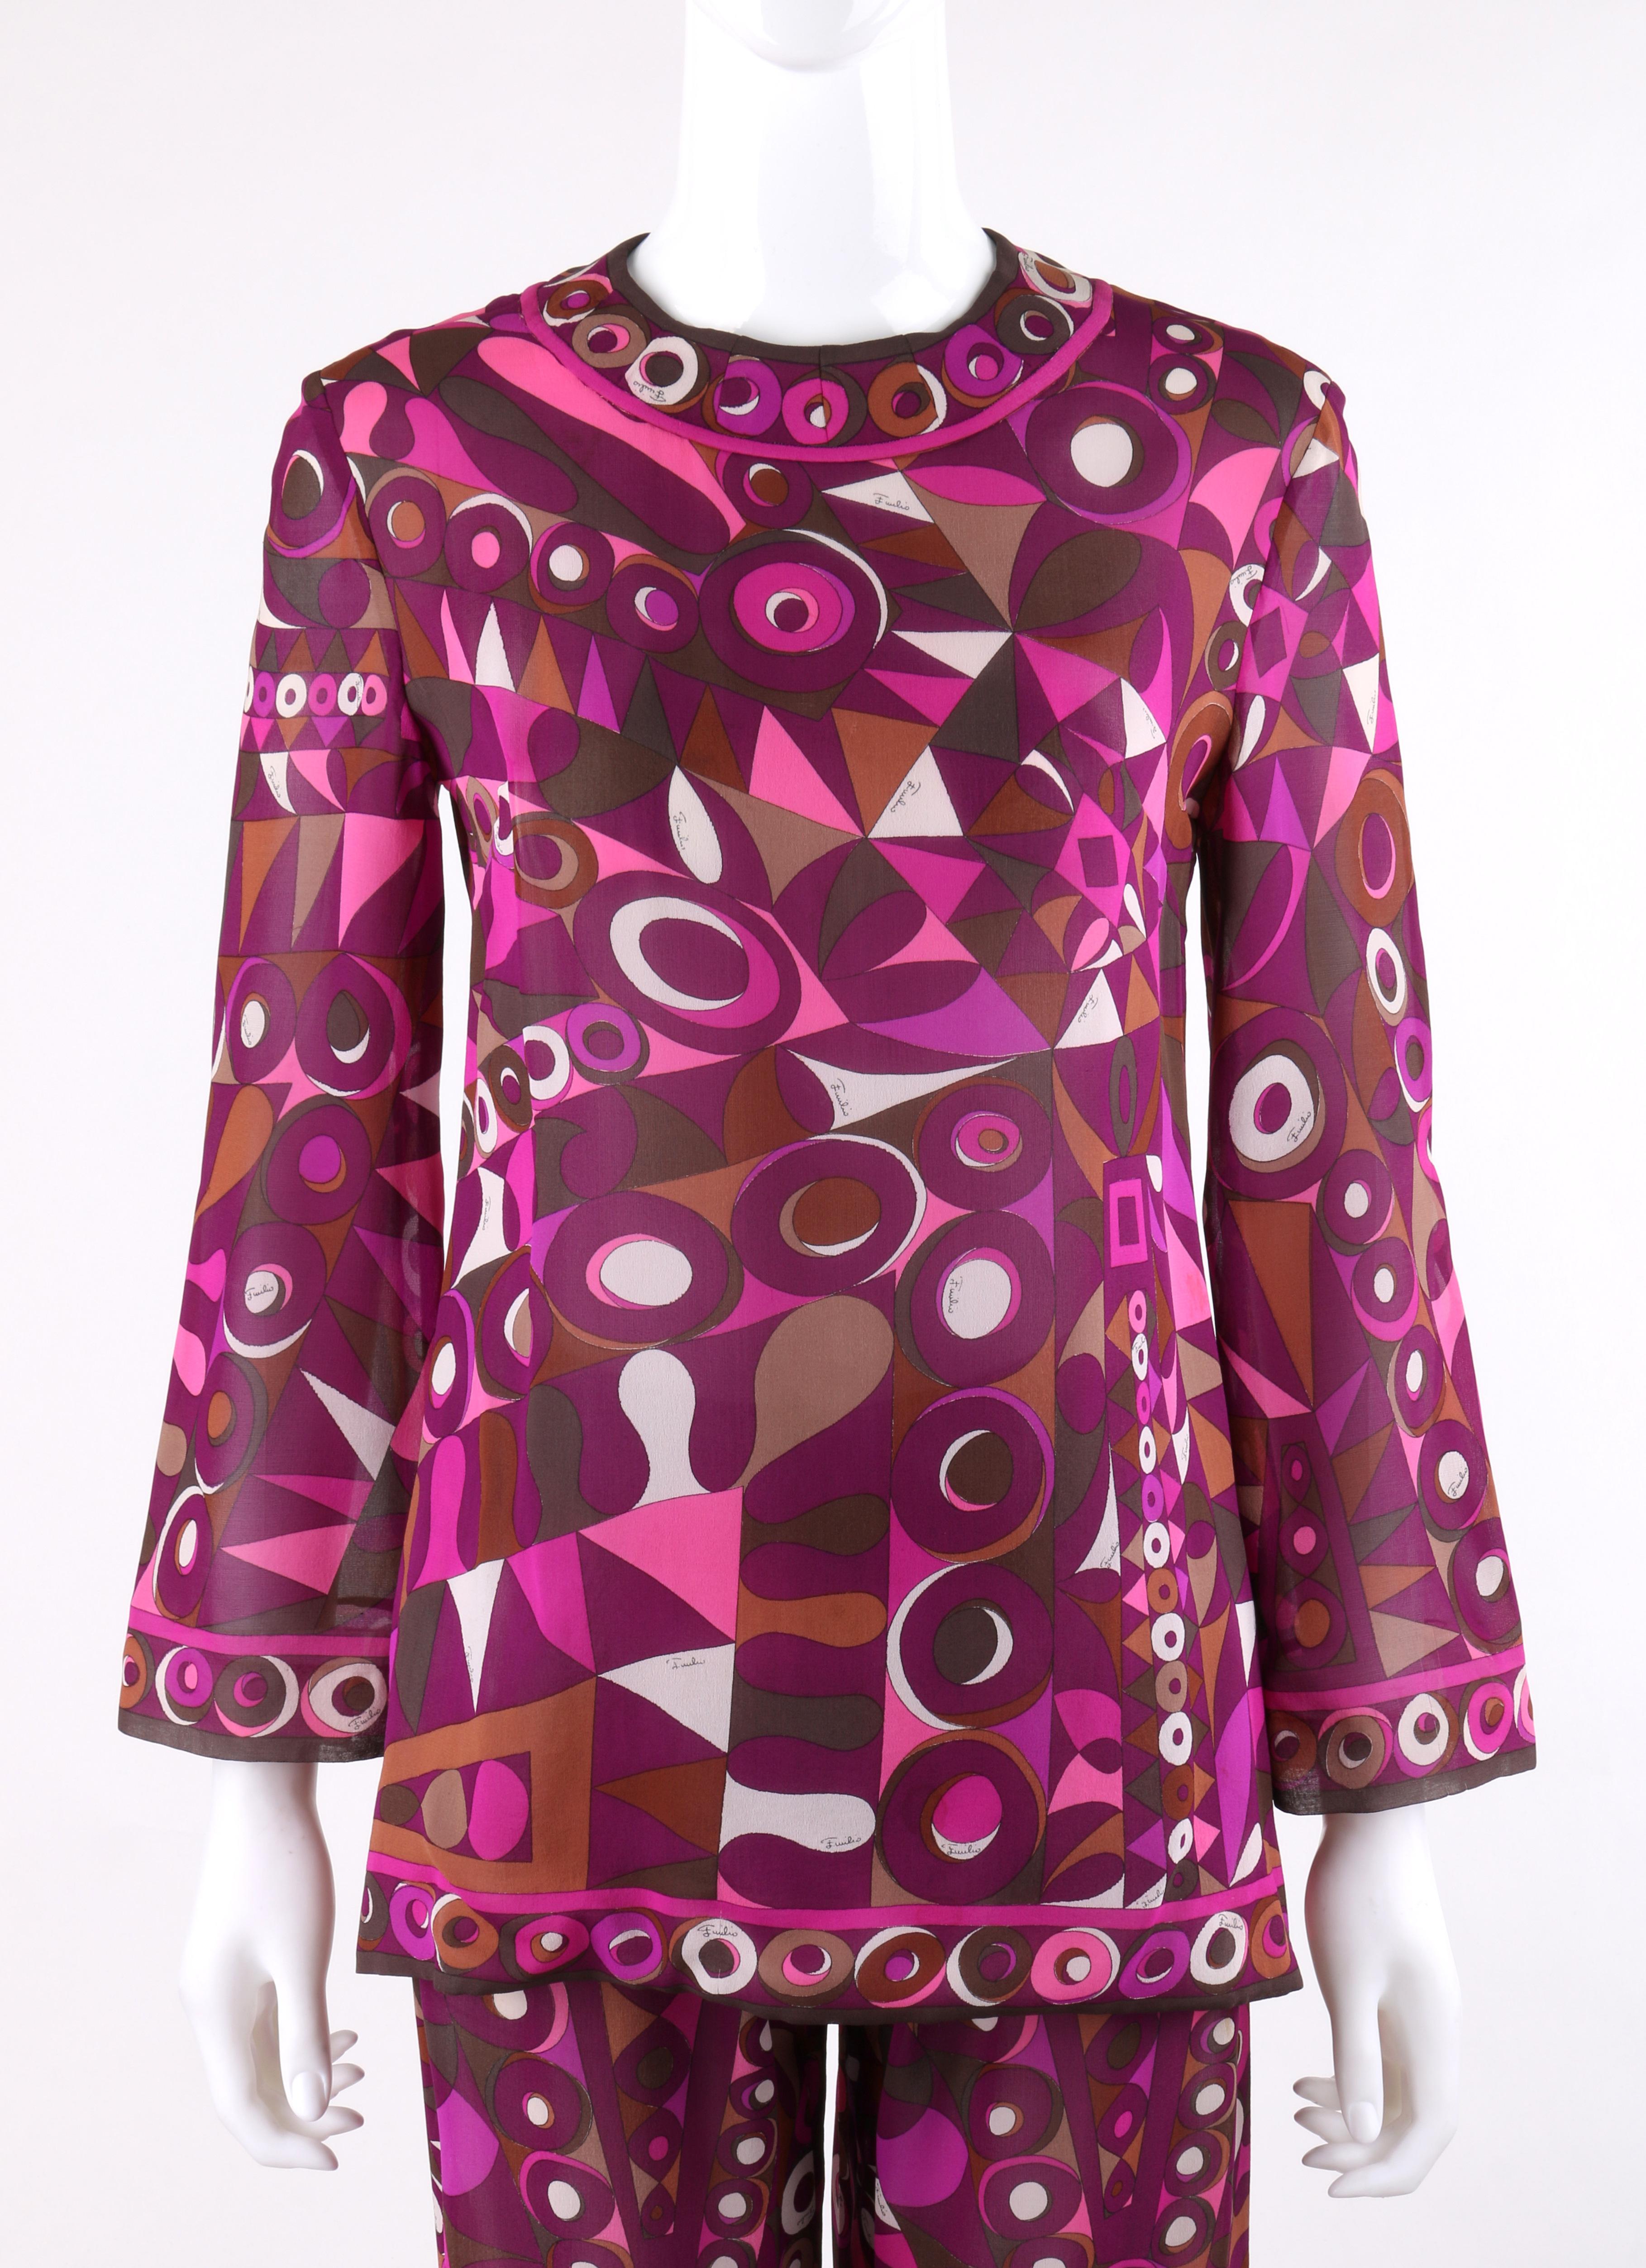 EMILIO PUCCI c.1960's 2pc Purple Multicolor Op Art Silk Blouse Pants Leisure Set Ensemble
 
Circa: c.1960’s
Label(s): Label has been removed
Style: Ensemble/suit set
Color(s): Shades of purple, brown, pink, and white
Lined: Yes (pants)
Unmarked